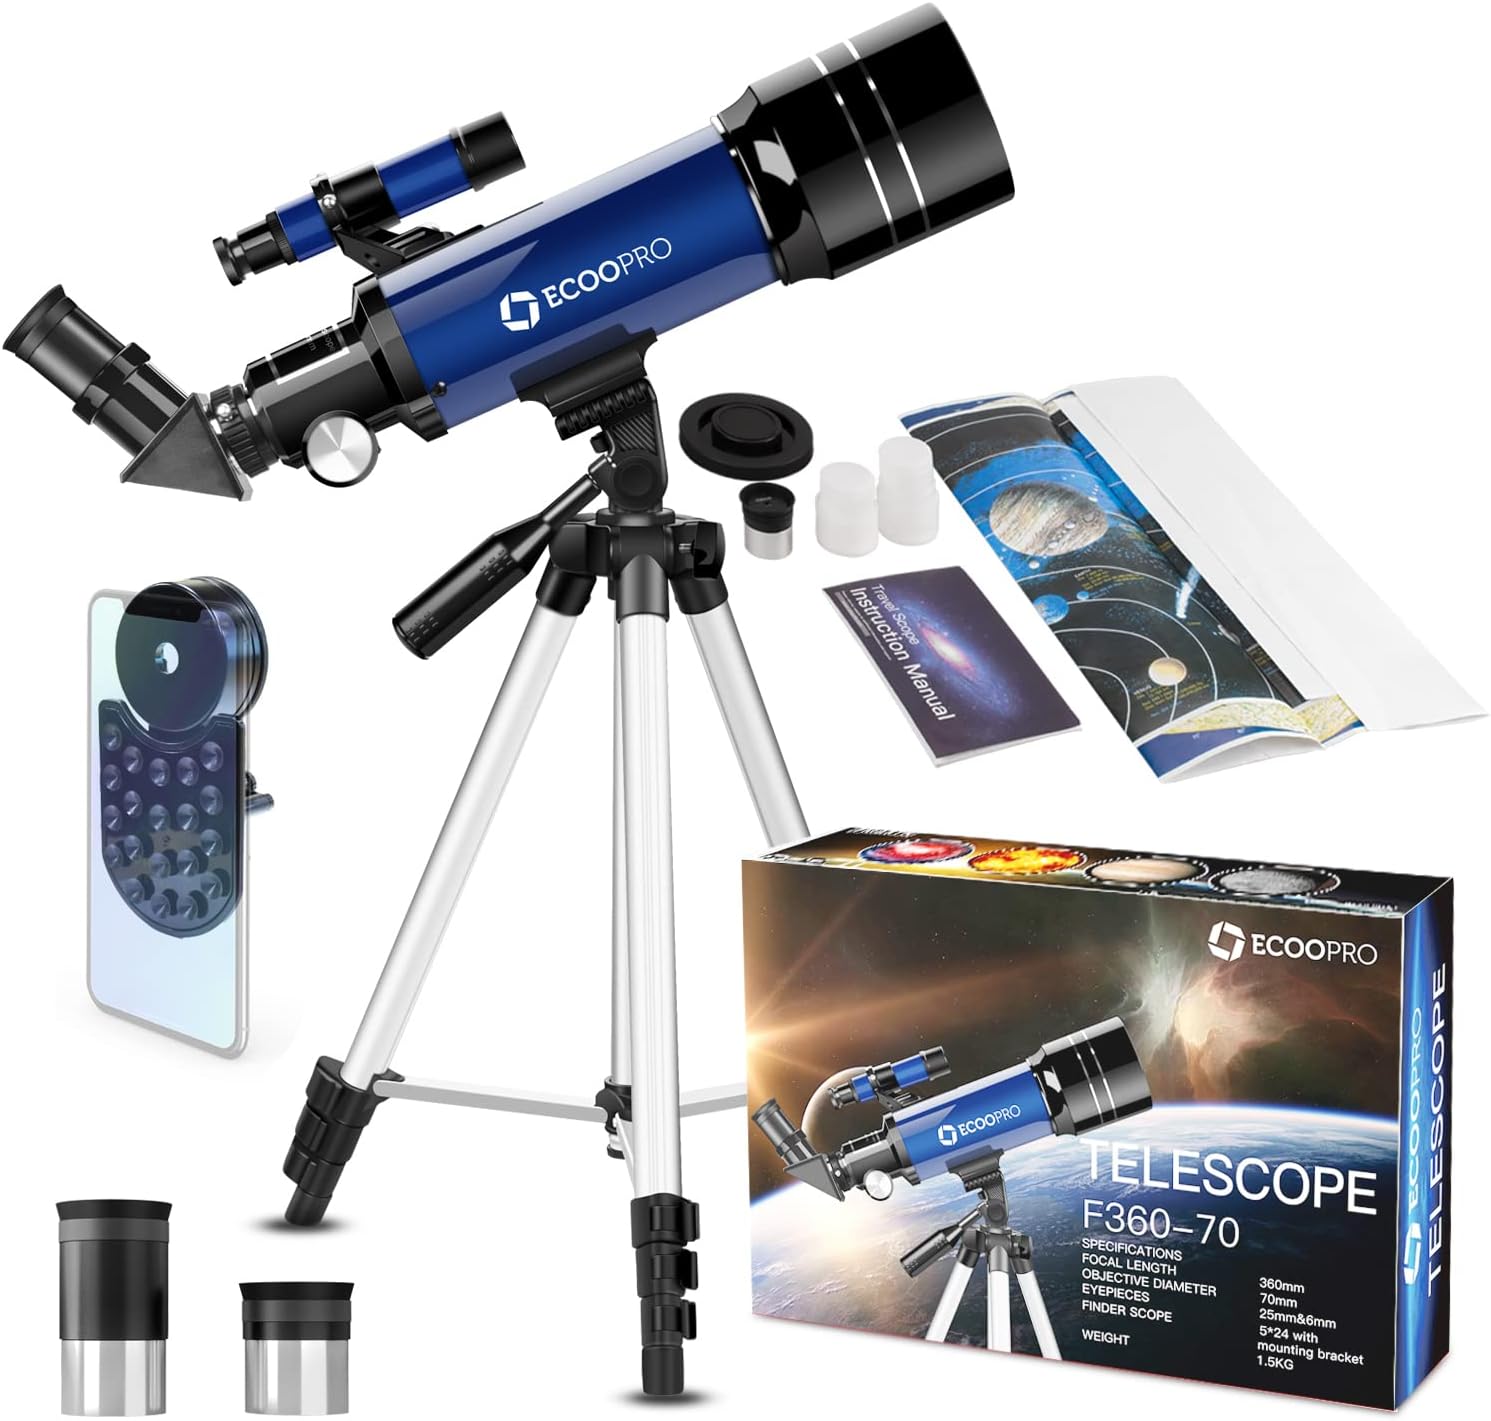 ECOOPRO Telescope for Kids, Beginners and Adults Review